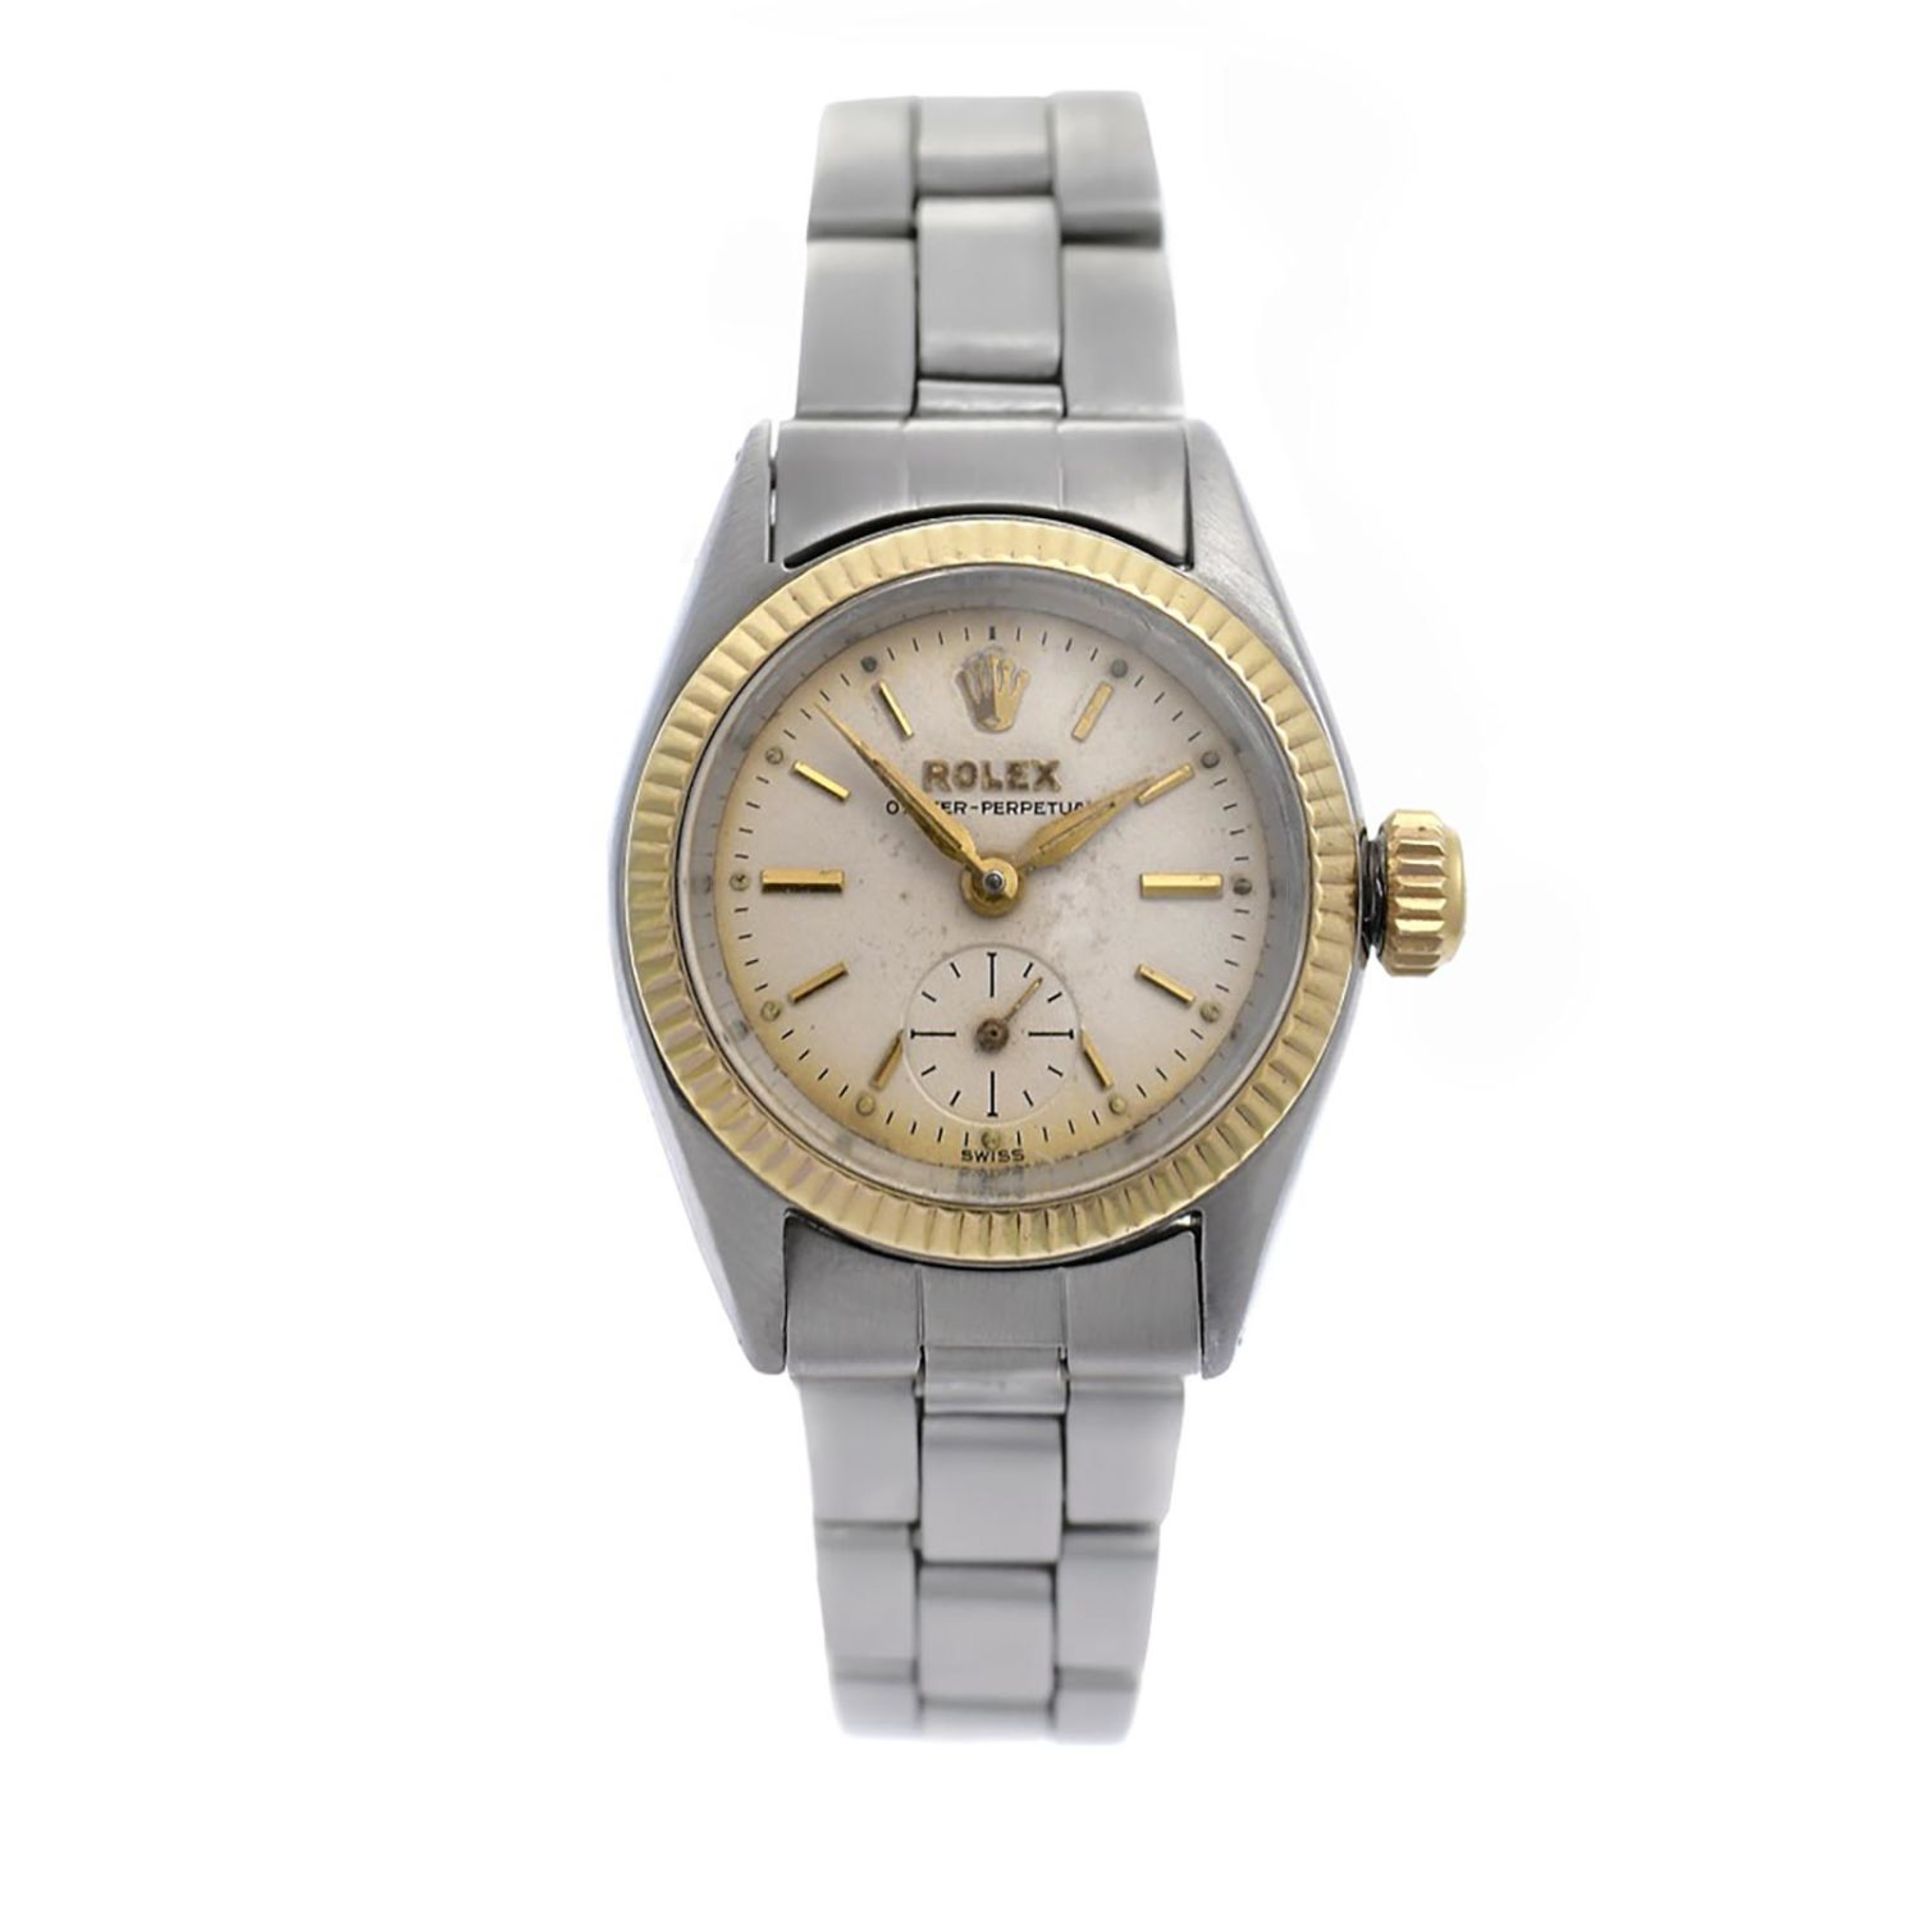 Rolex Oyster Perpetual 25mm - Image 2 of 4